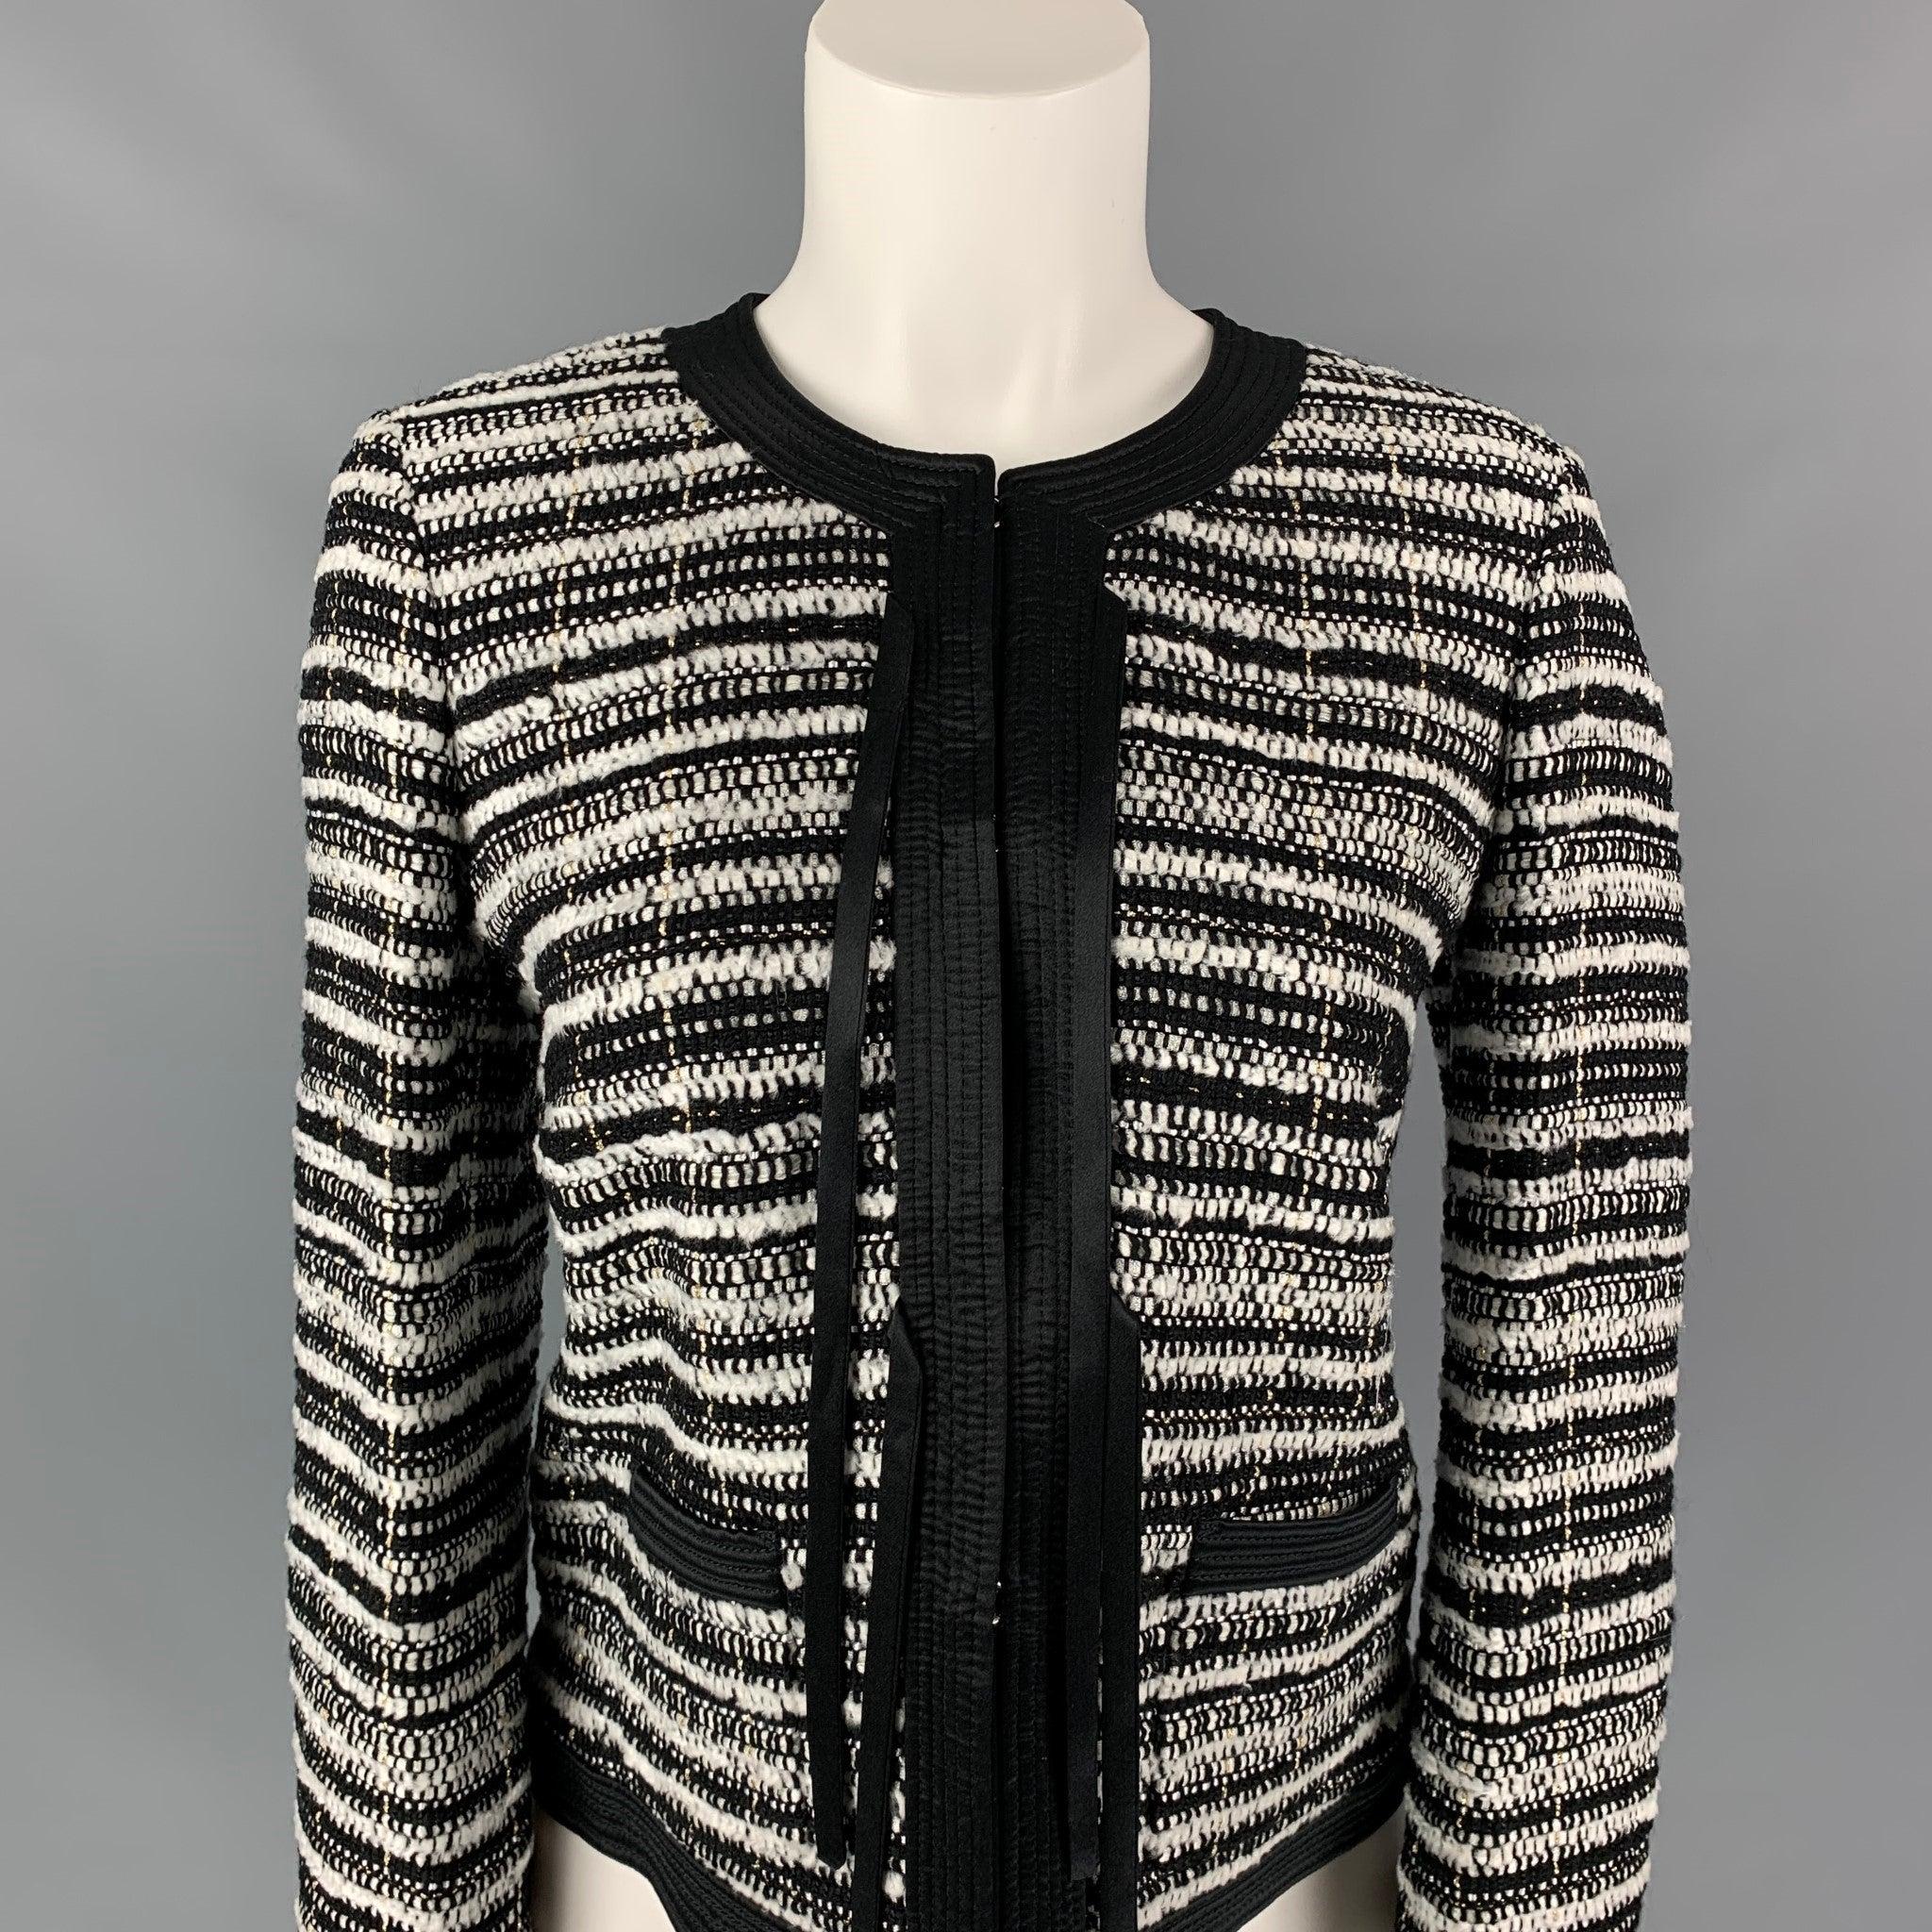 ROBERTO CAVALLI jacket comes in a black & white stripe textured boucle wool with a full liner blend featuring a collarless style, zipper sleeves, strap details, slit pockets, and a hook & loop closure. Made in Italy.New With Tags.
 

Marked:  